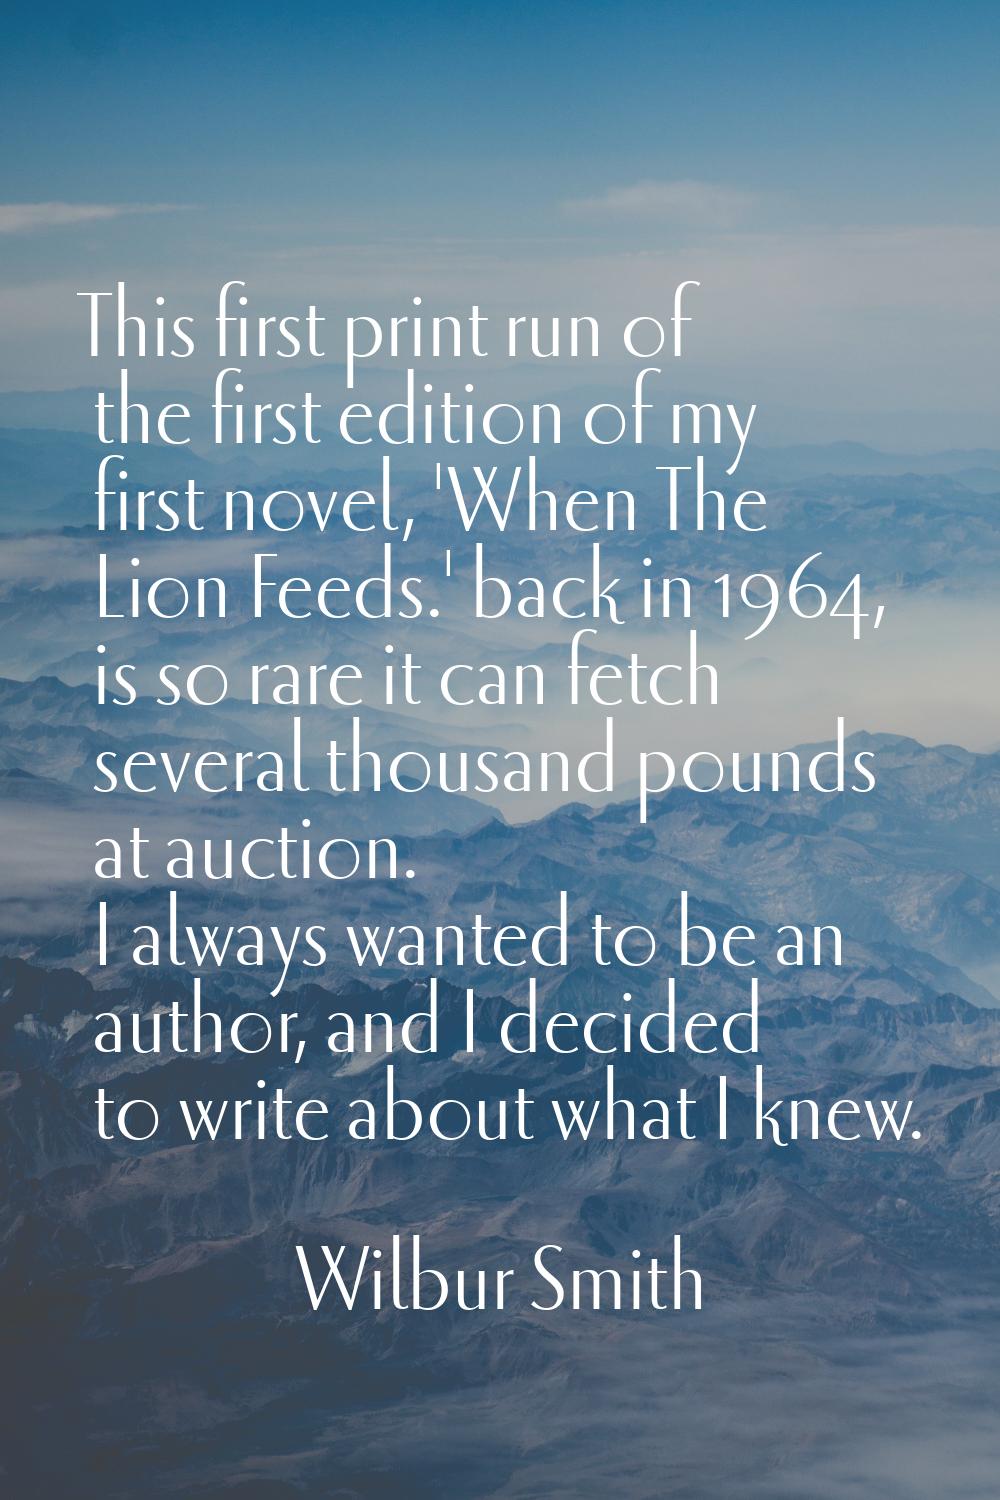 This first print run of the first edition of my first novel, 'When The Lion Feeds.' back in 1964, i